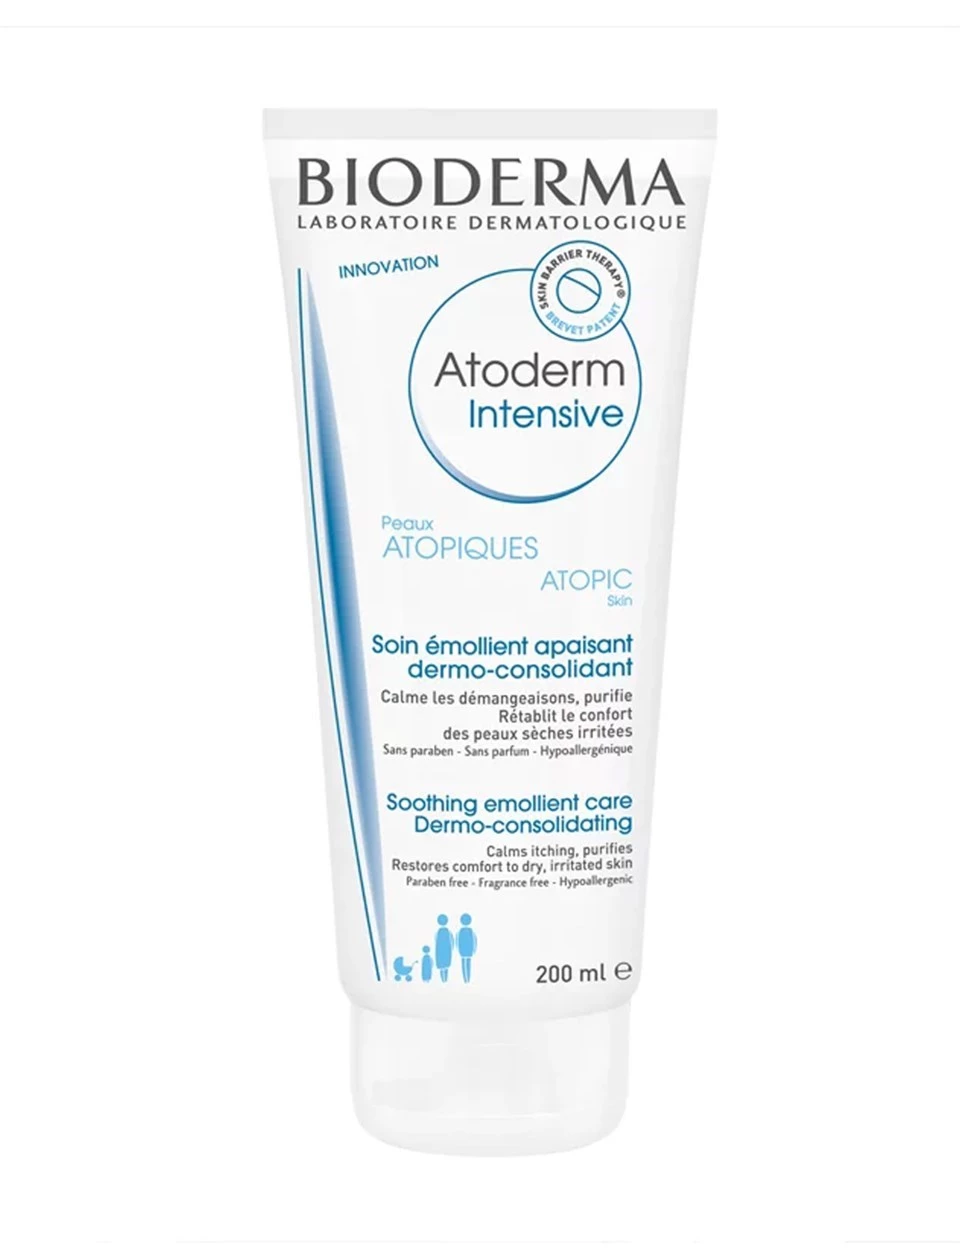 Bioderma Atoderm Intensive Soothing Emollient Care 200 ml